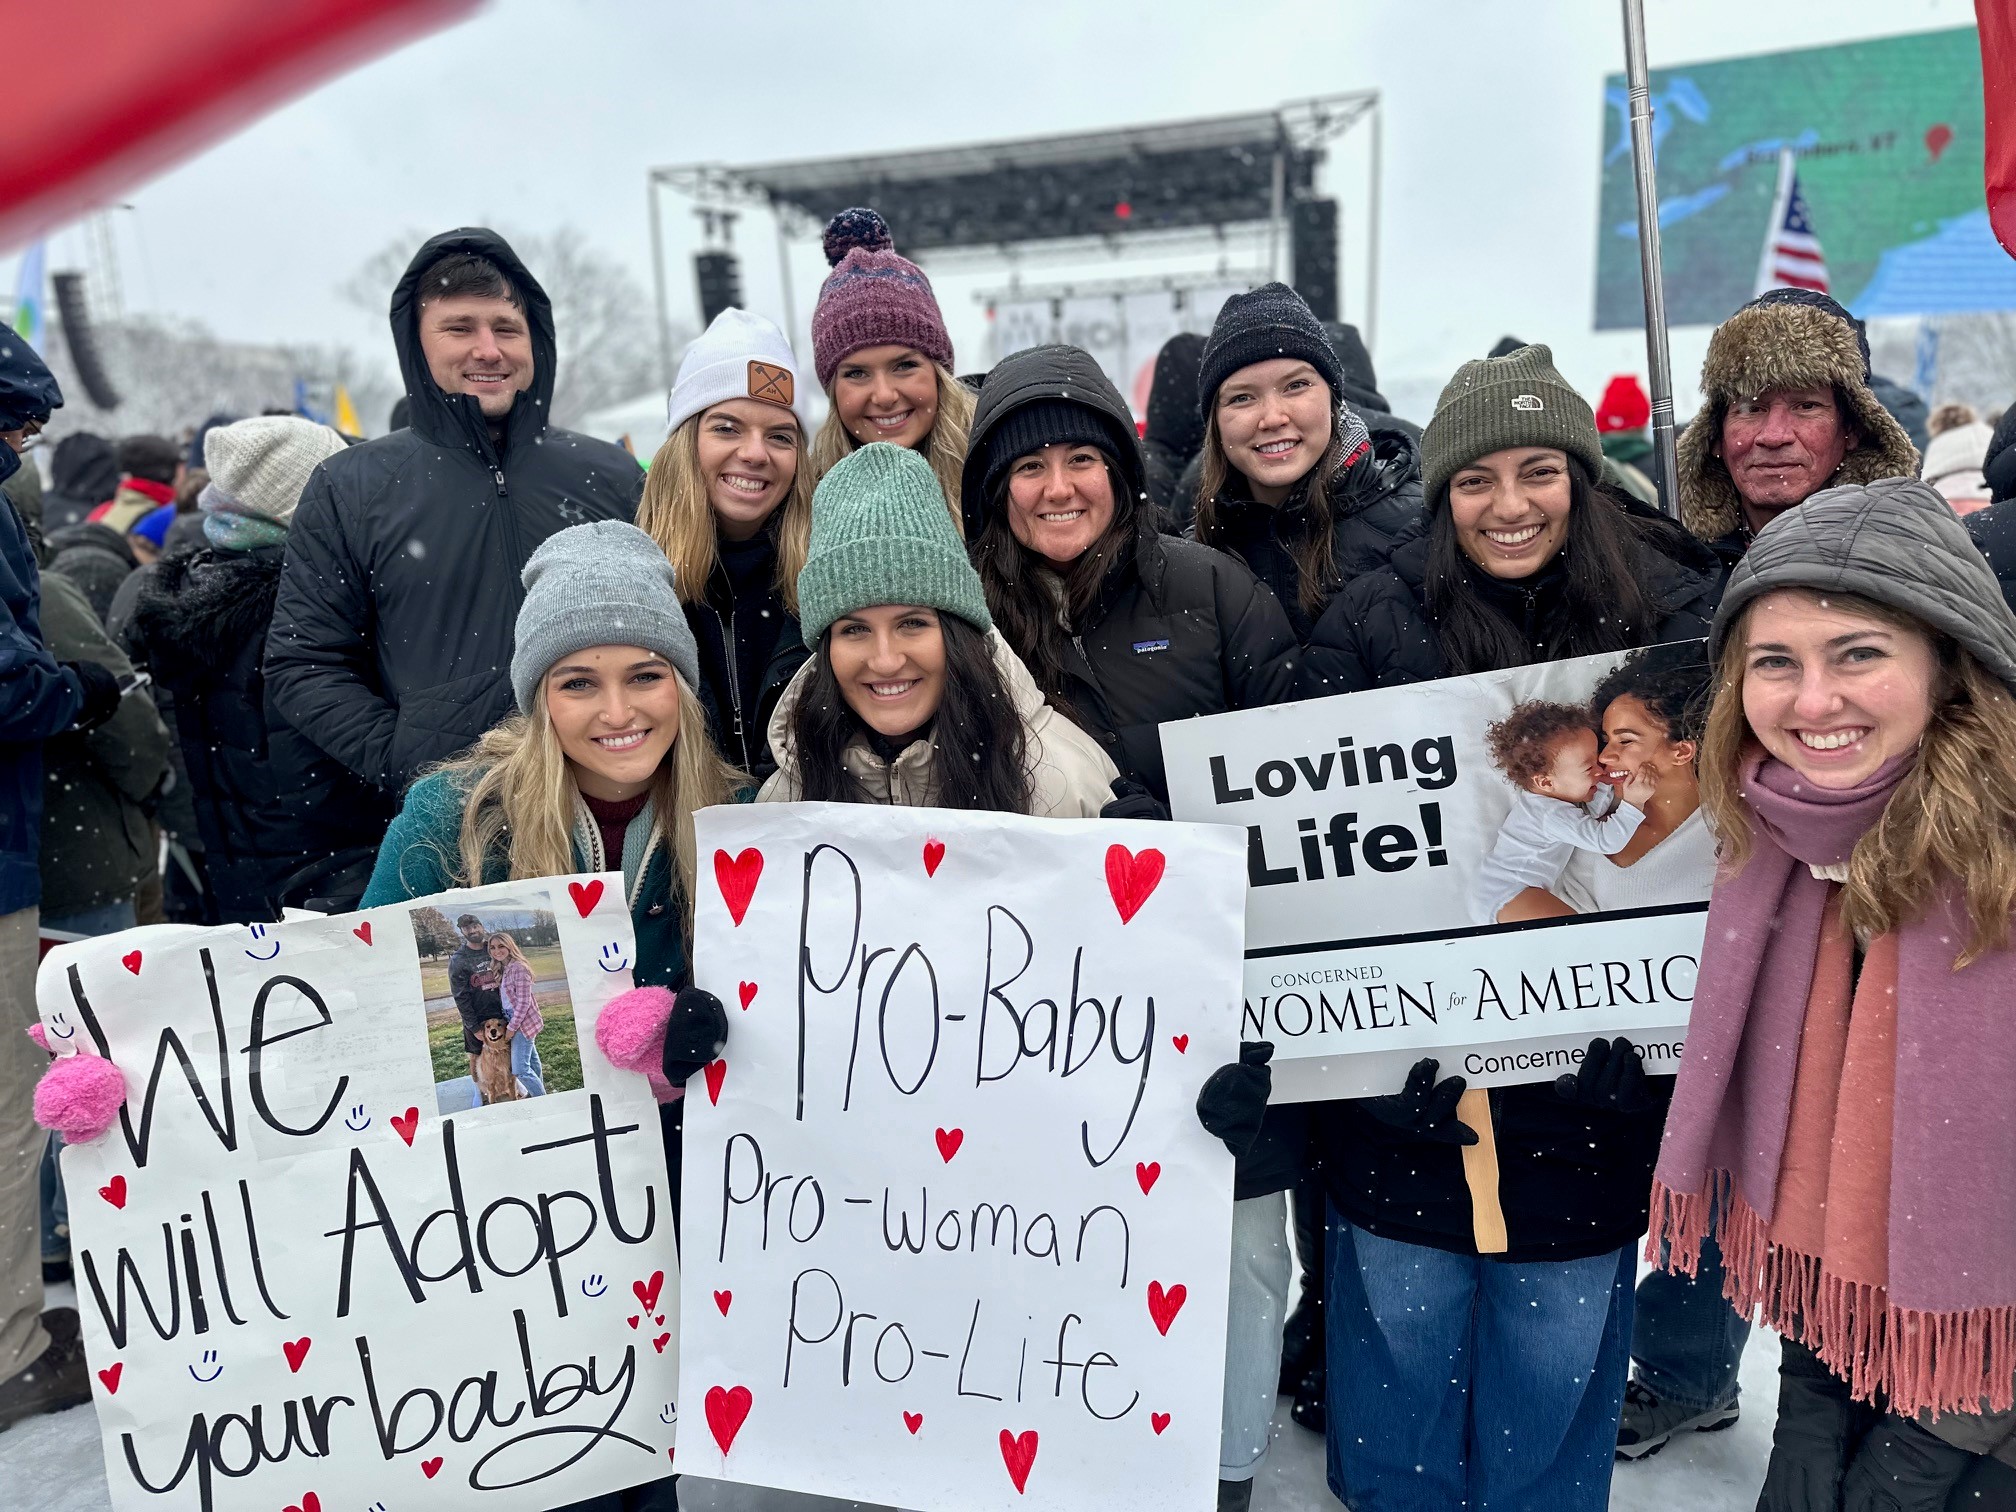 Women for America March for Life  Today in Washington, D.C.